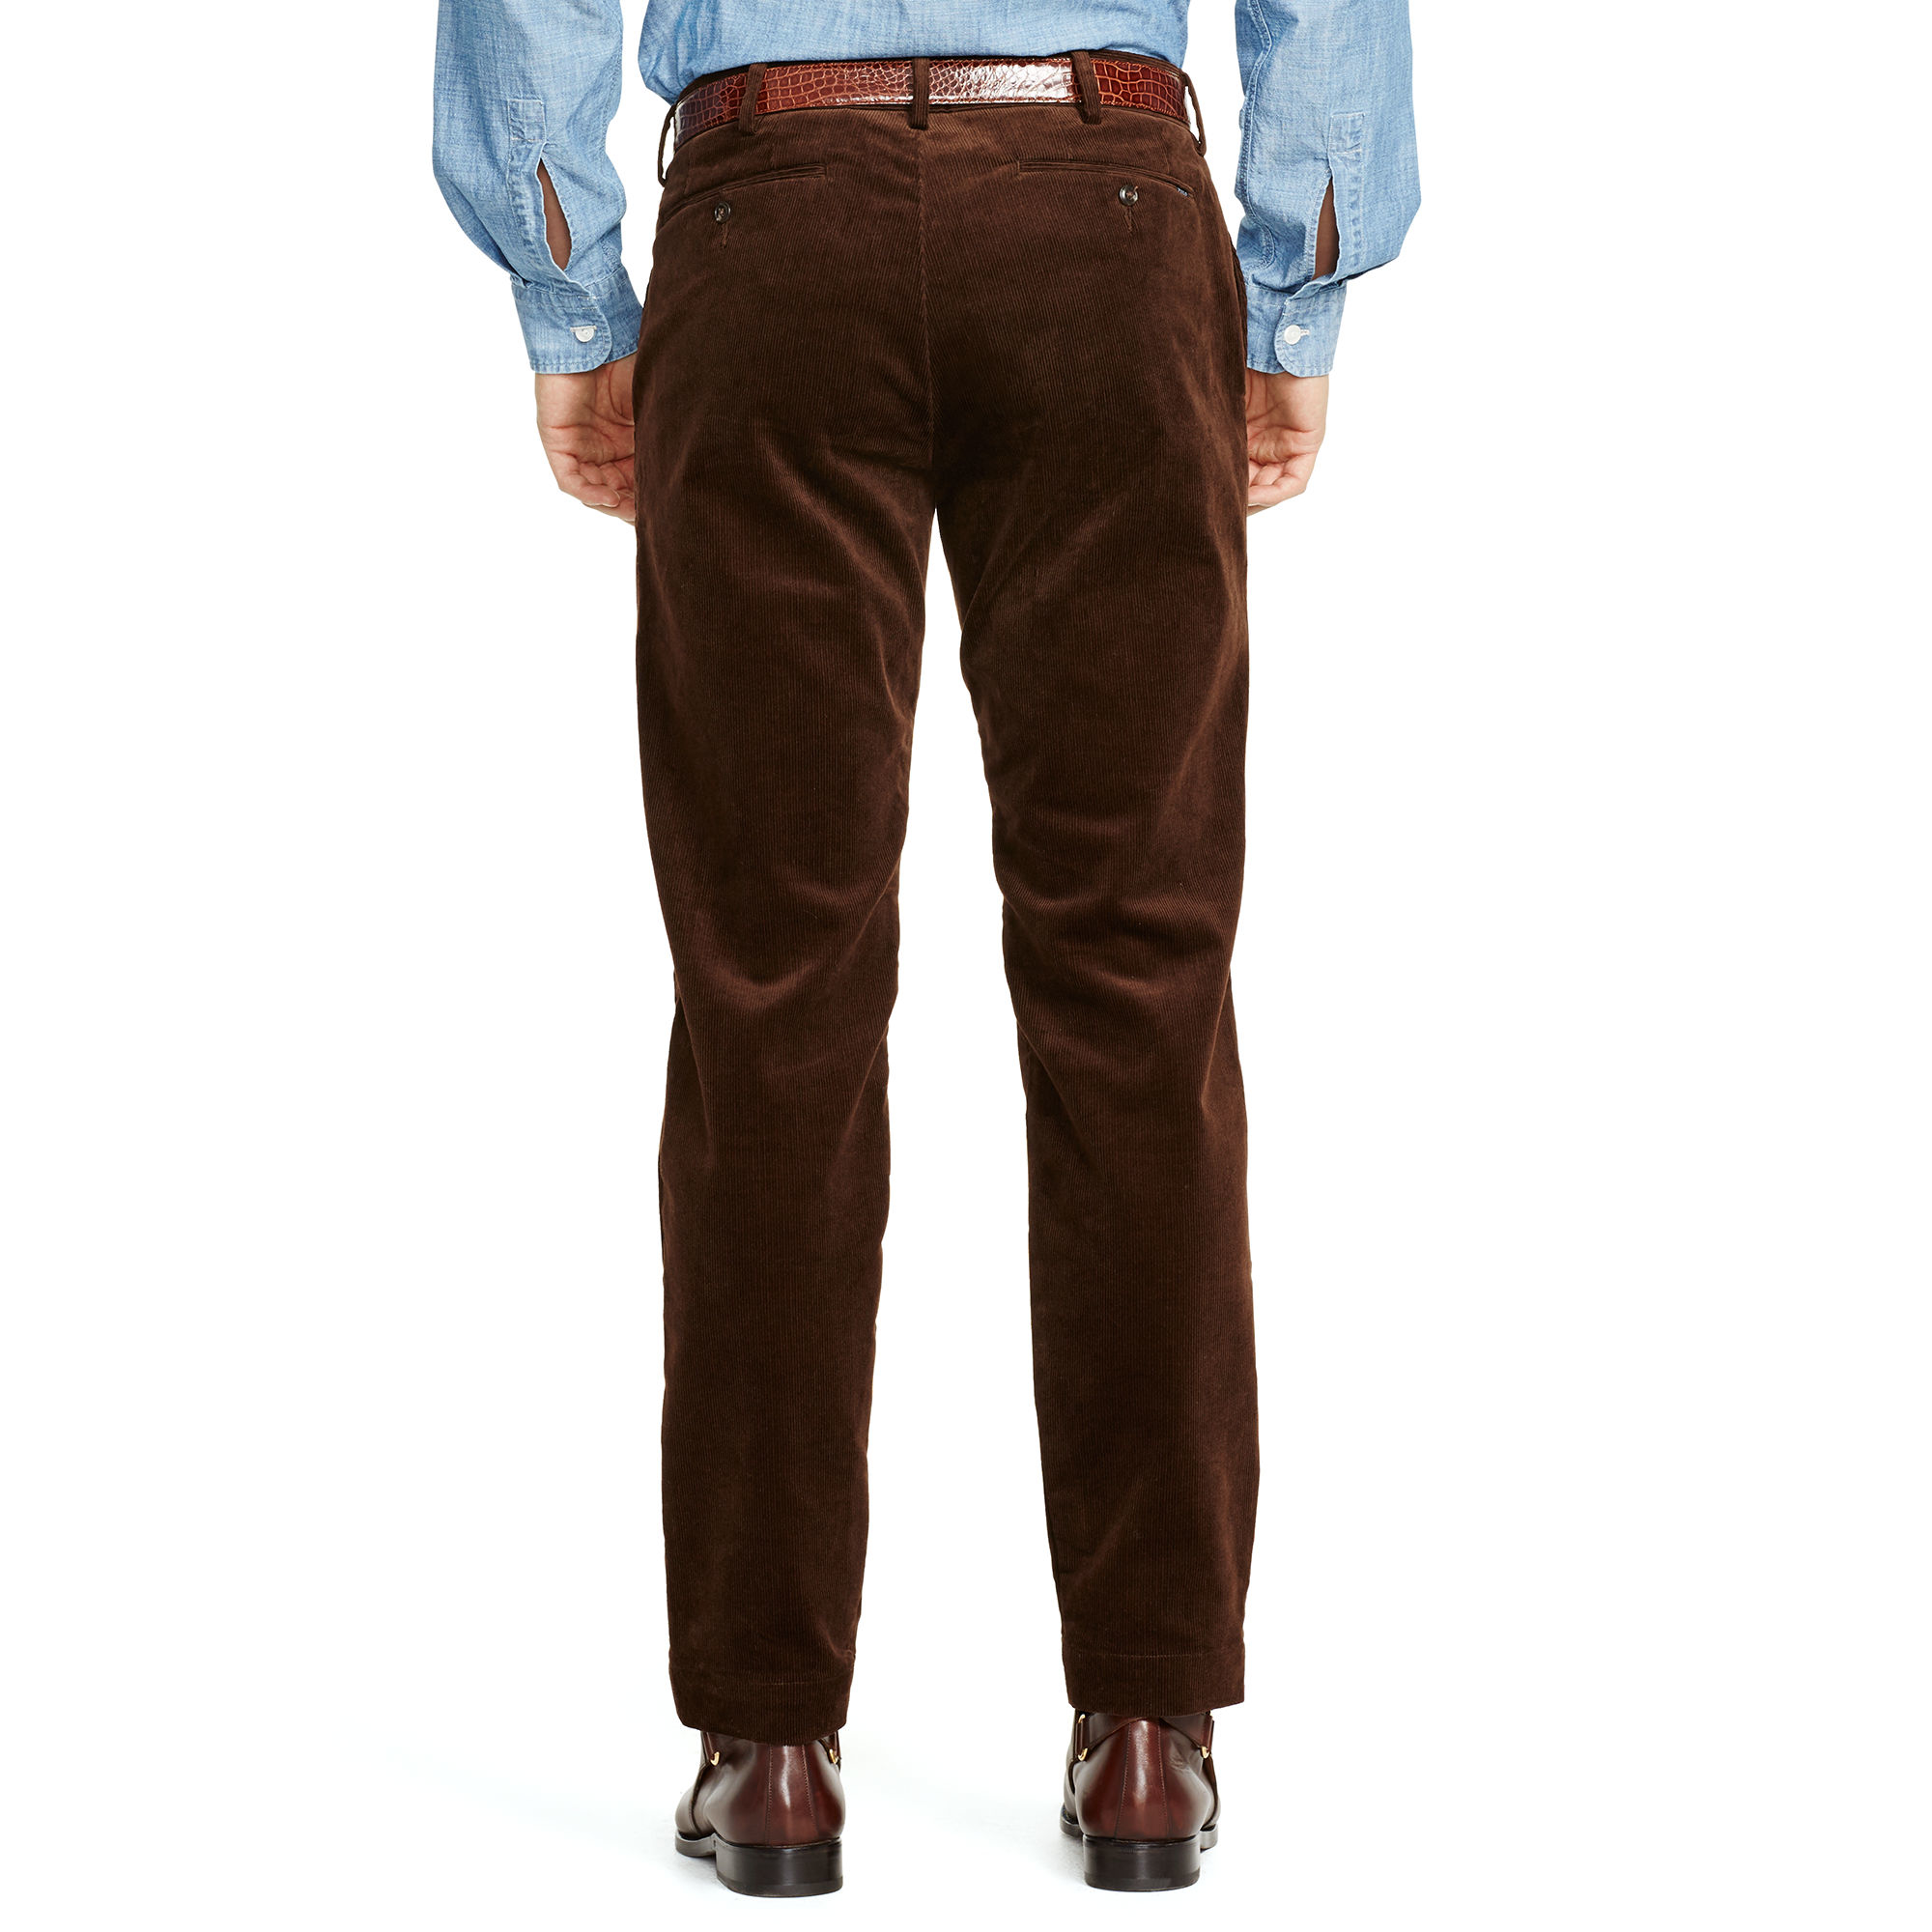 Polo Ralph Lauren Slim-fit Stretch Corduroy Pant in Brown for Men - Lyst